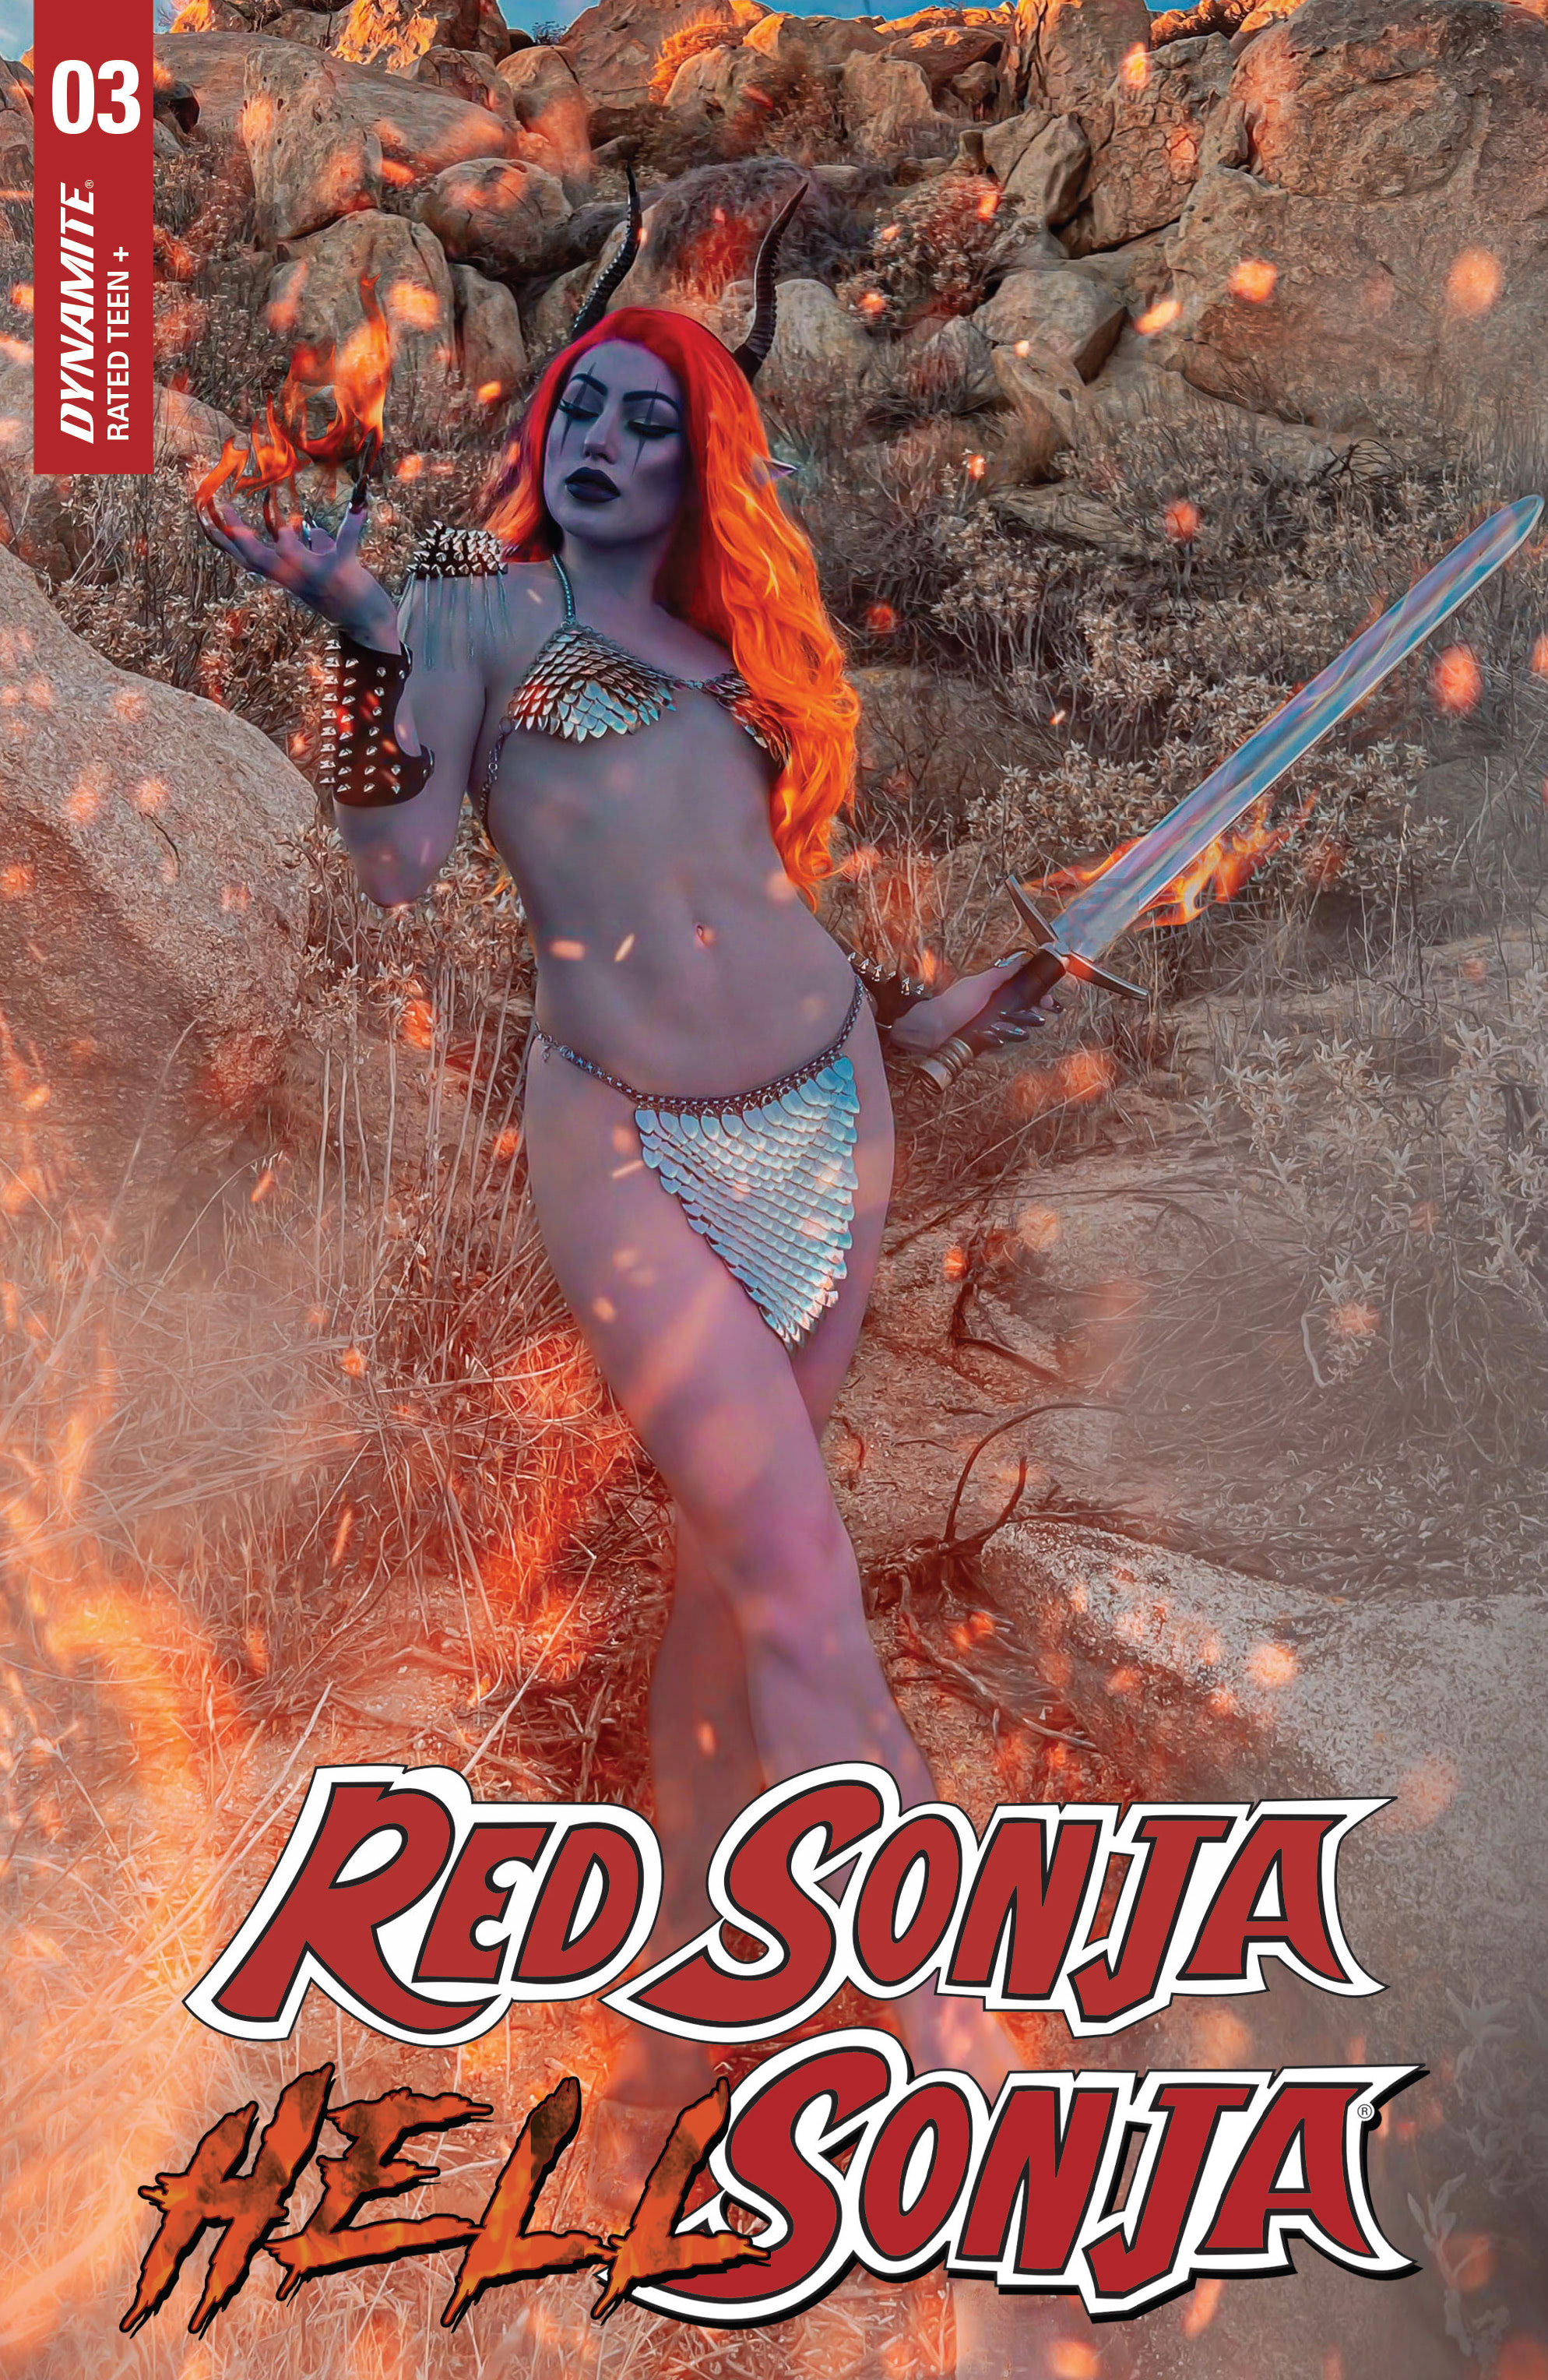 Read online Red Sonja / Hell Sonja comic -  Issue #3 - 5